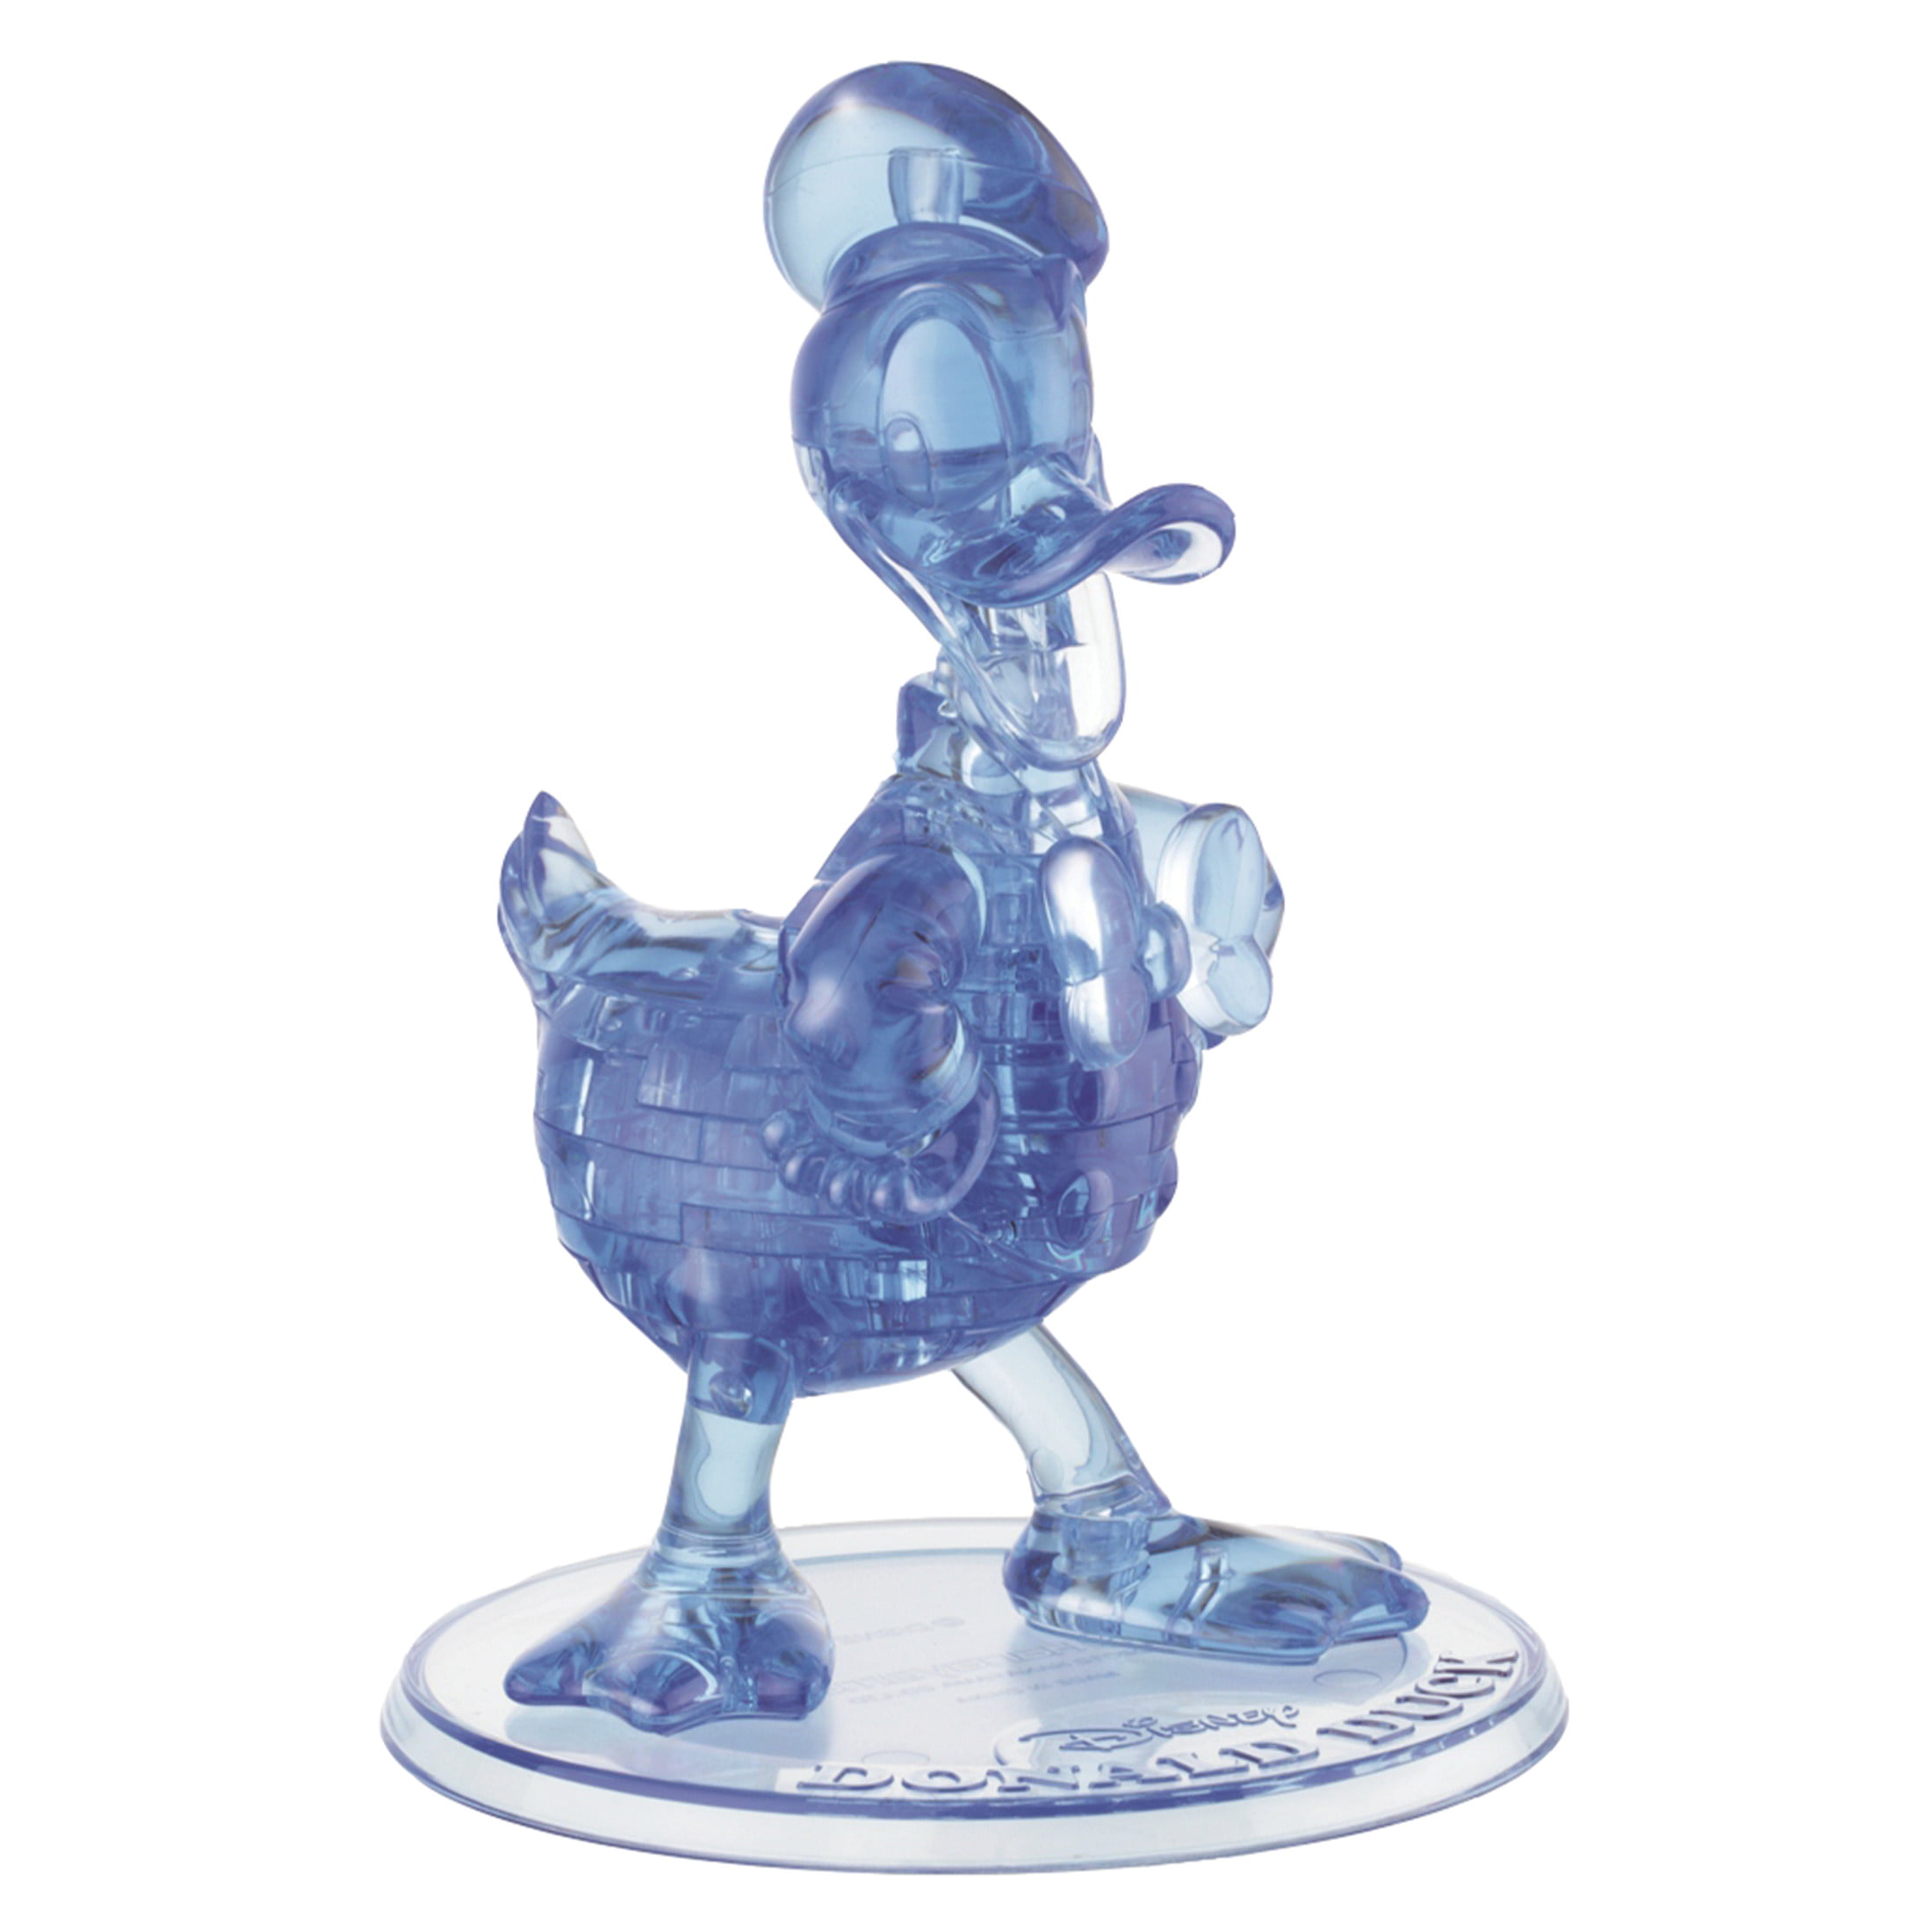 Bepuzzled Original 3d Crystal Puzzle Disney Cheshire Cat Level 1 Collectible Toy for sale online 